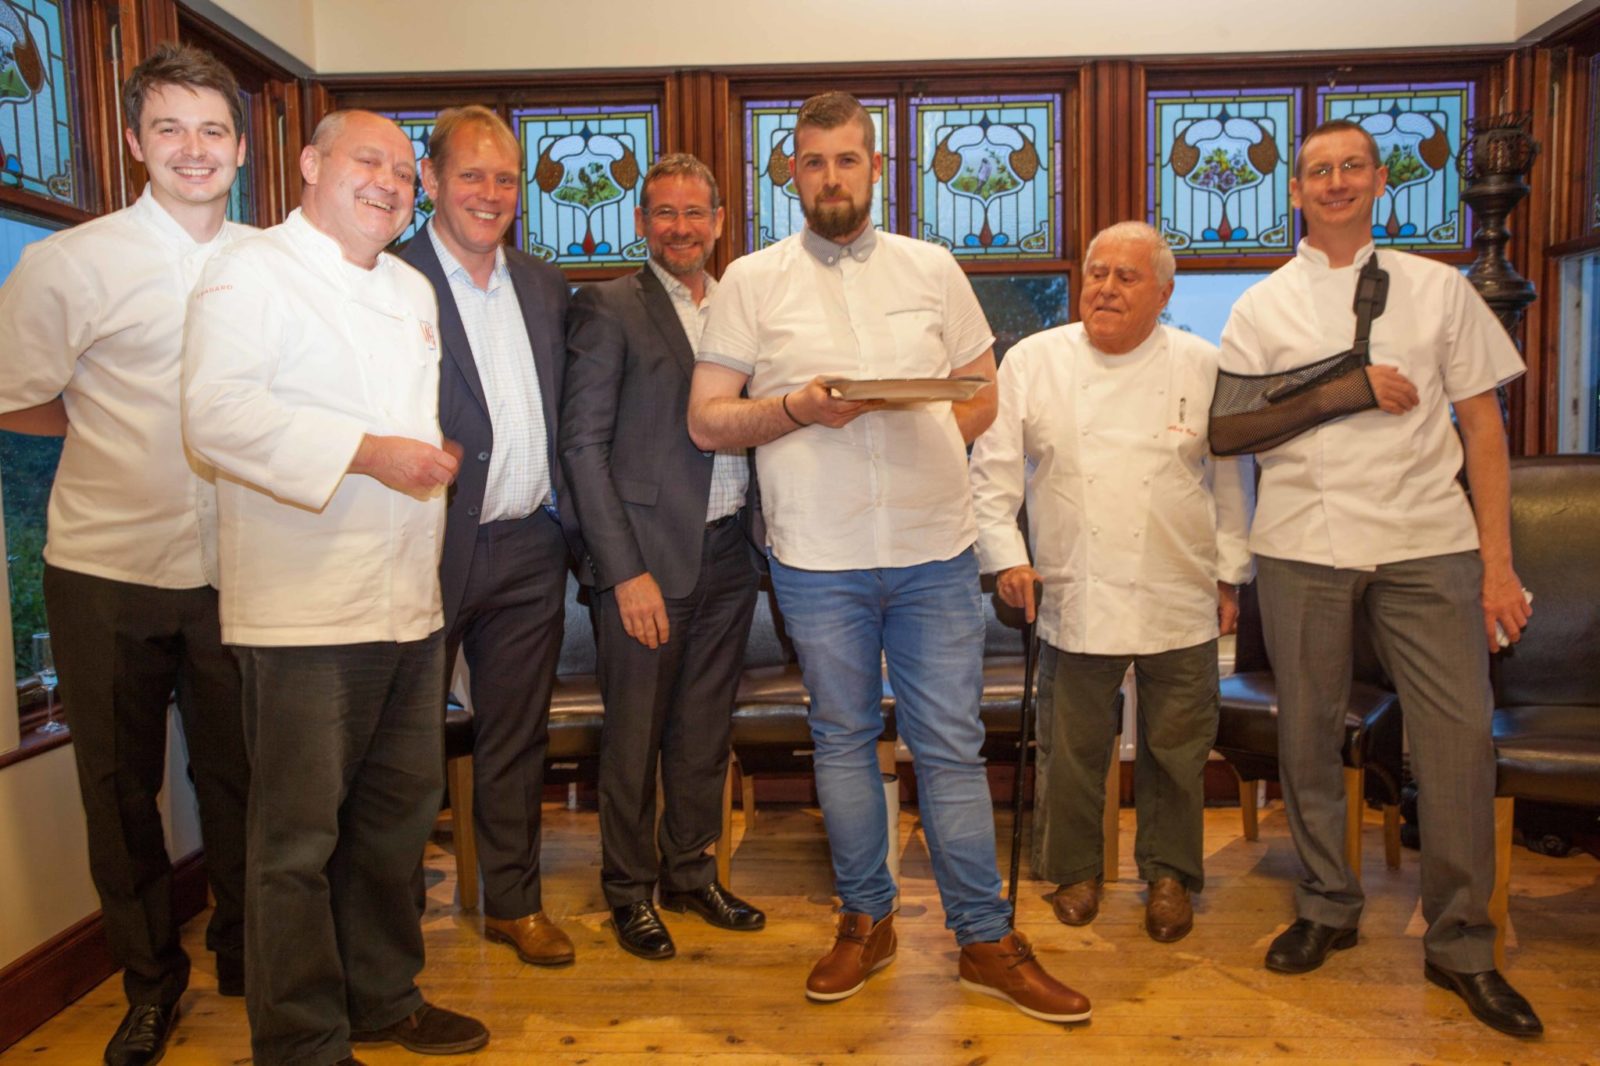 The Young Highland Chef 2015 judges and winner. Left to right: Derek Johnstone, Steven Doherty, Brian Maule, Andrew Fairlie, David MacDonald, Albert Roux, Glen Watson. Picture: Mark Rodgers